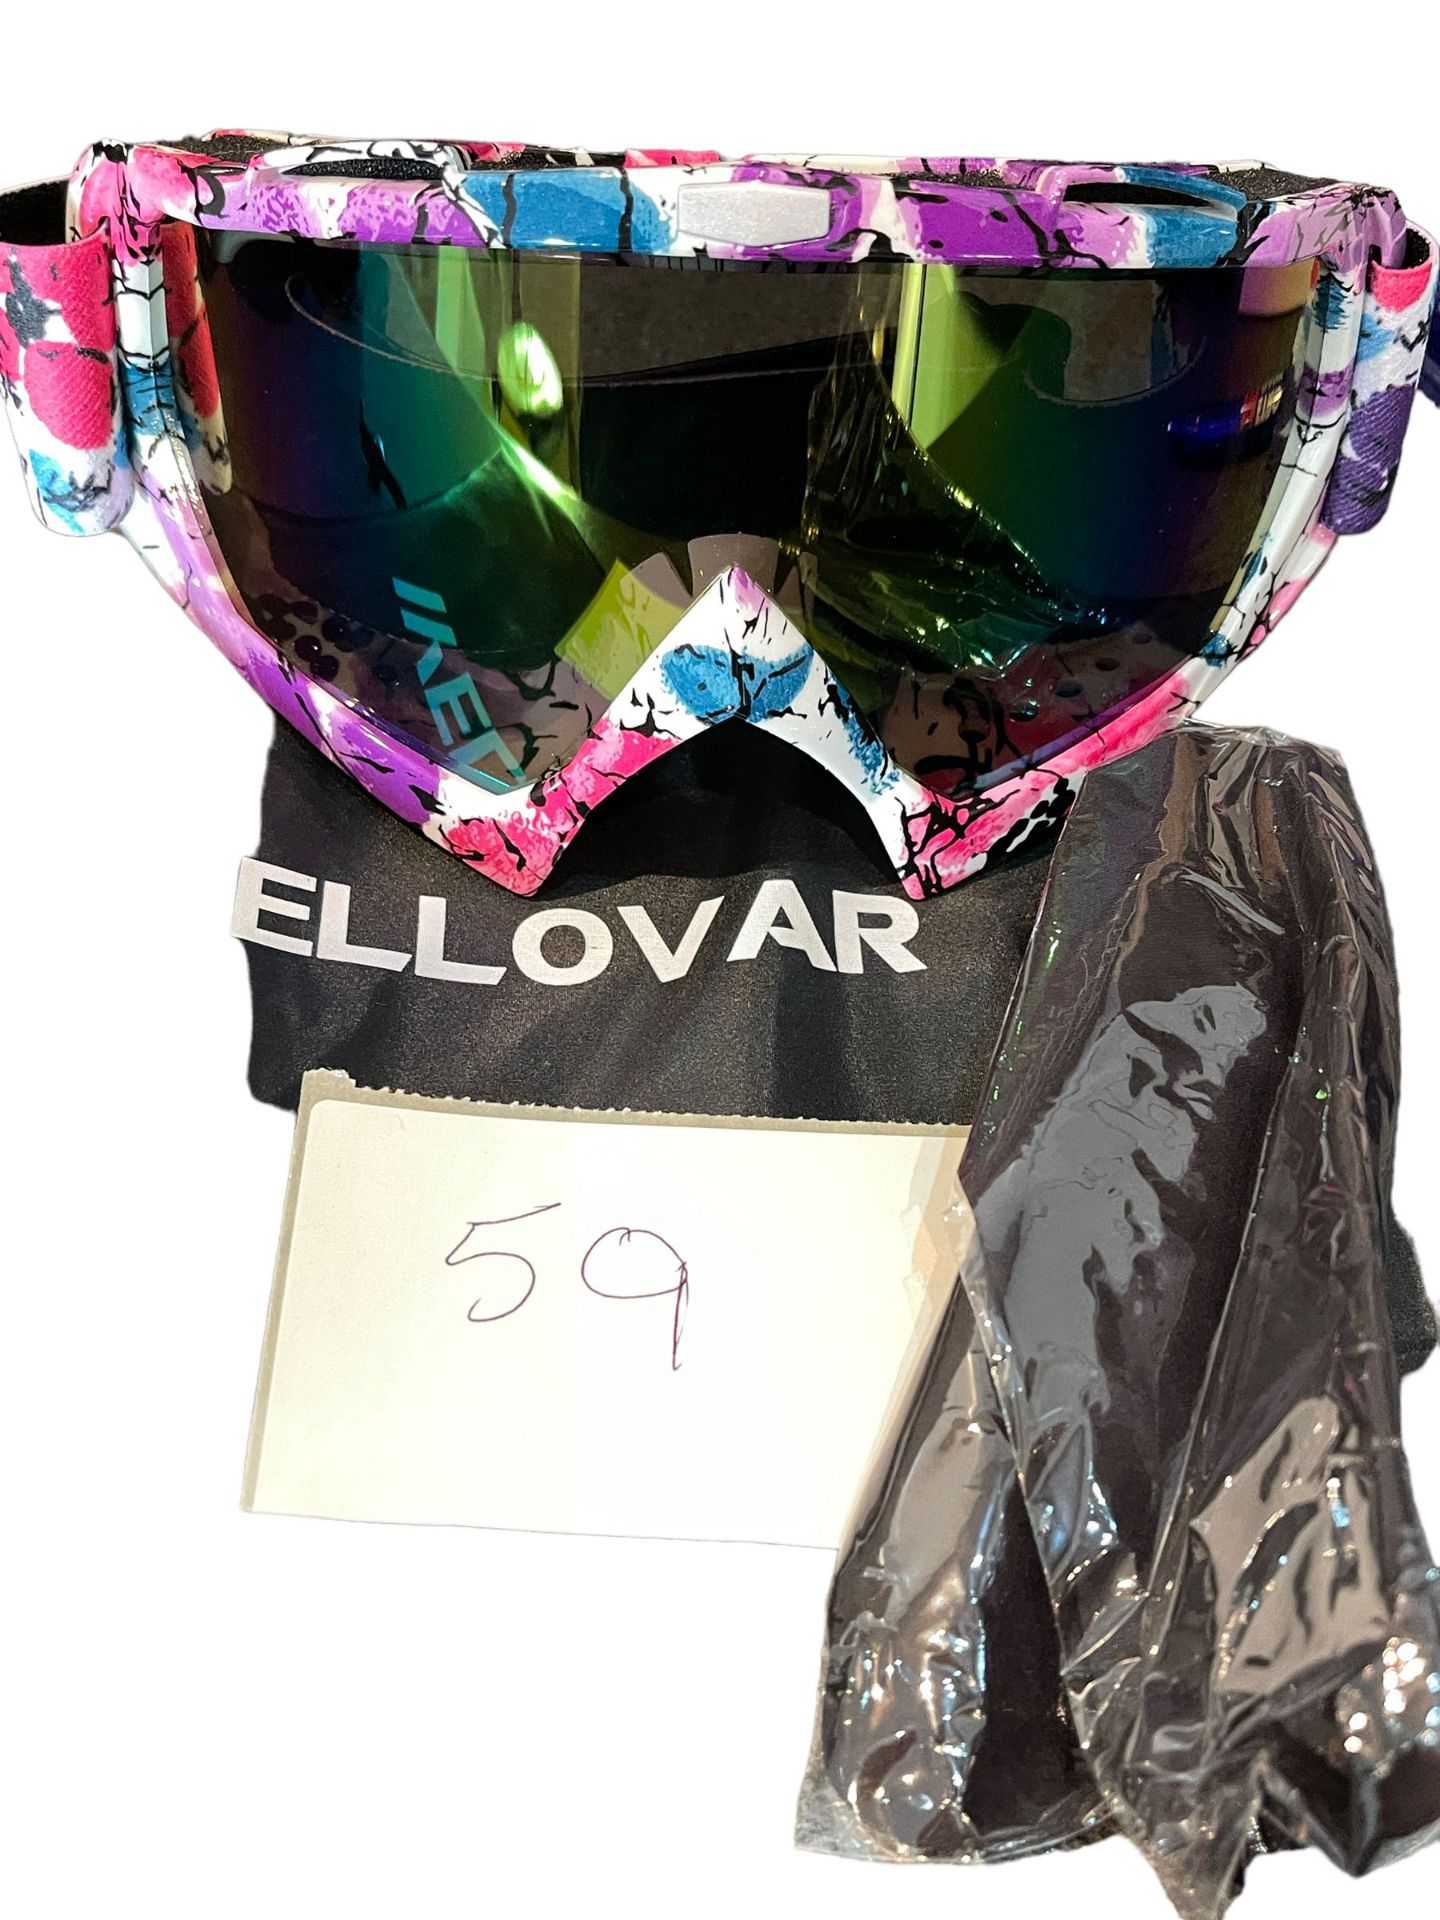 wellovar Snow goggles new - Image 3 of 3